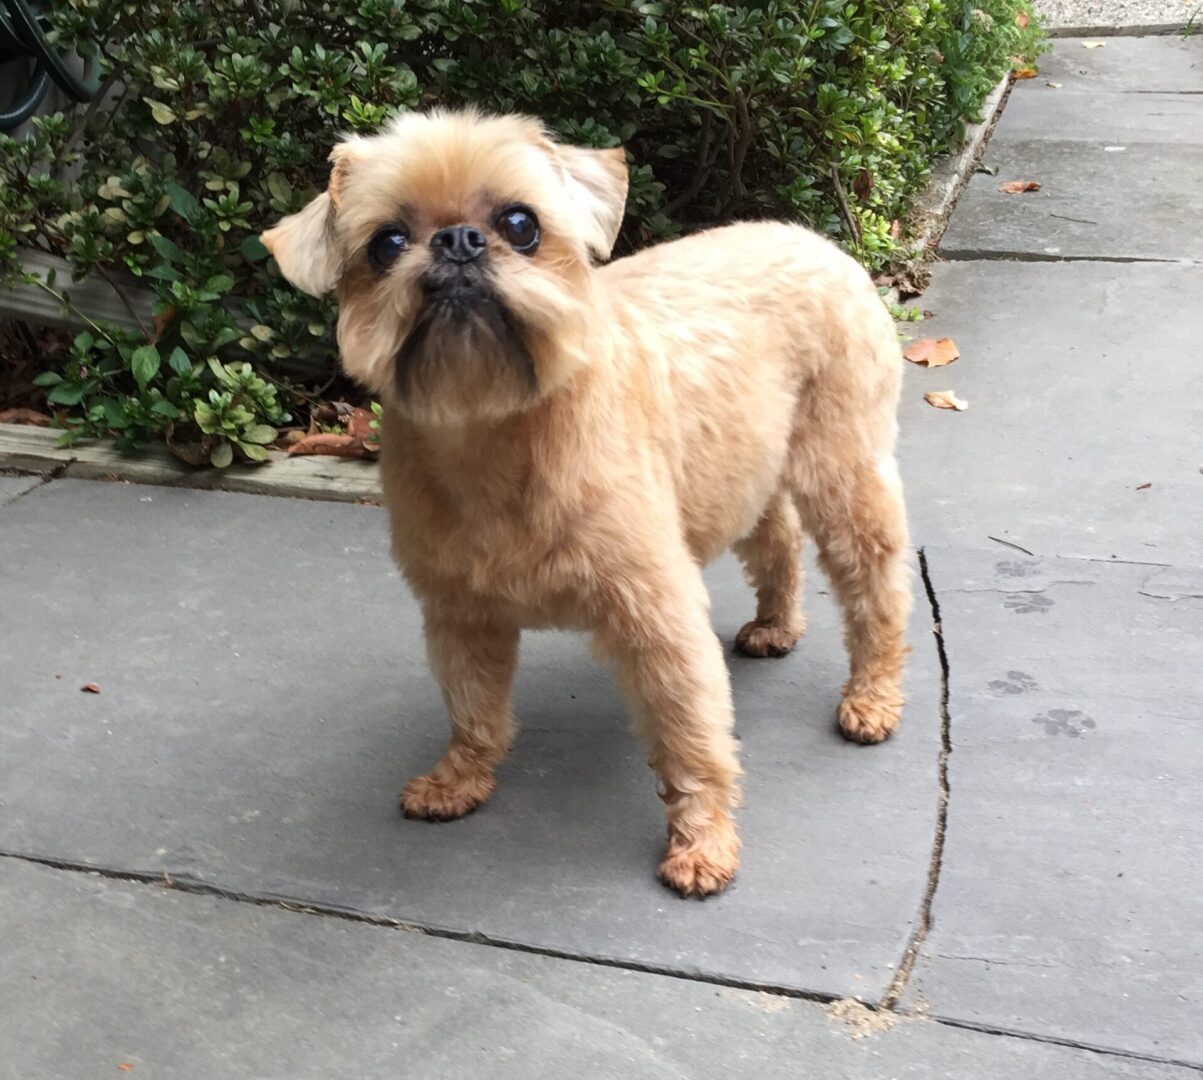 A Brussels Griffon with fluffy light brown fur